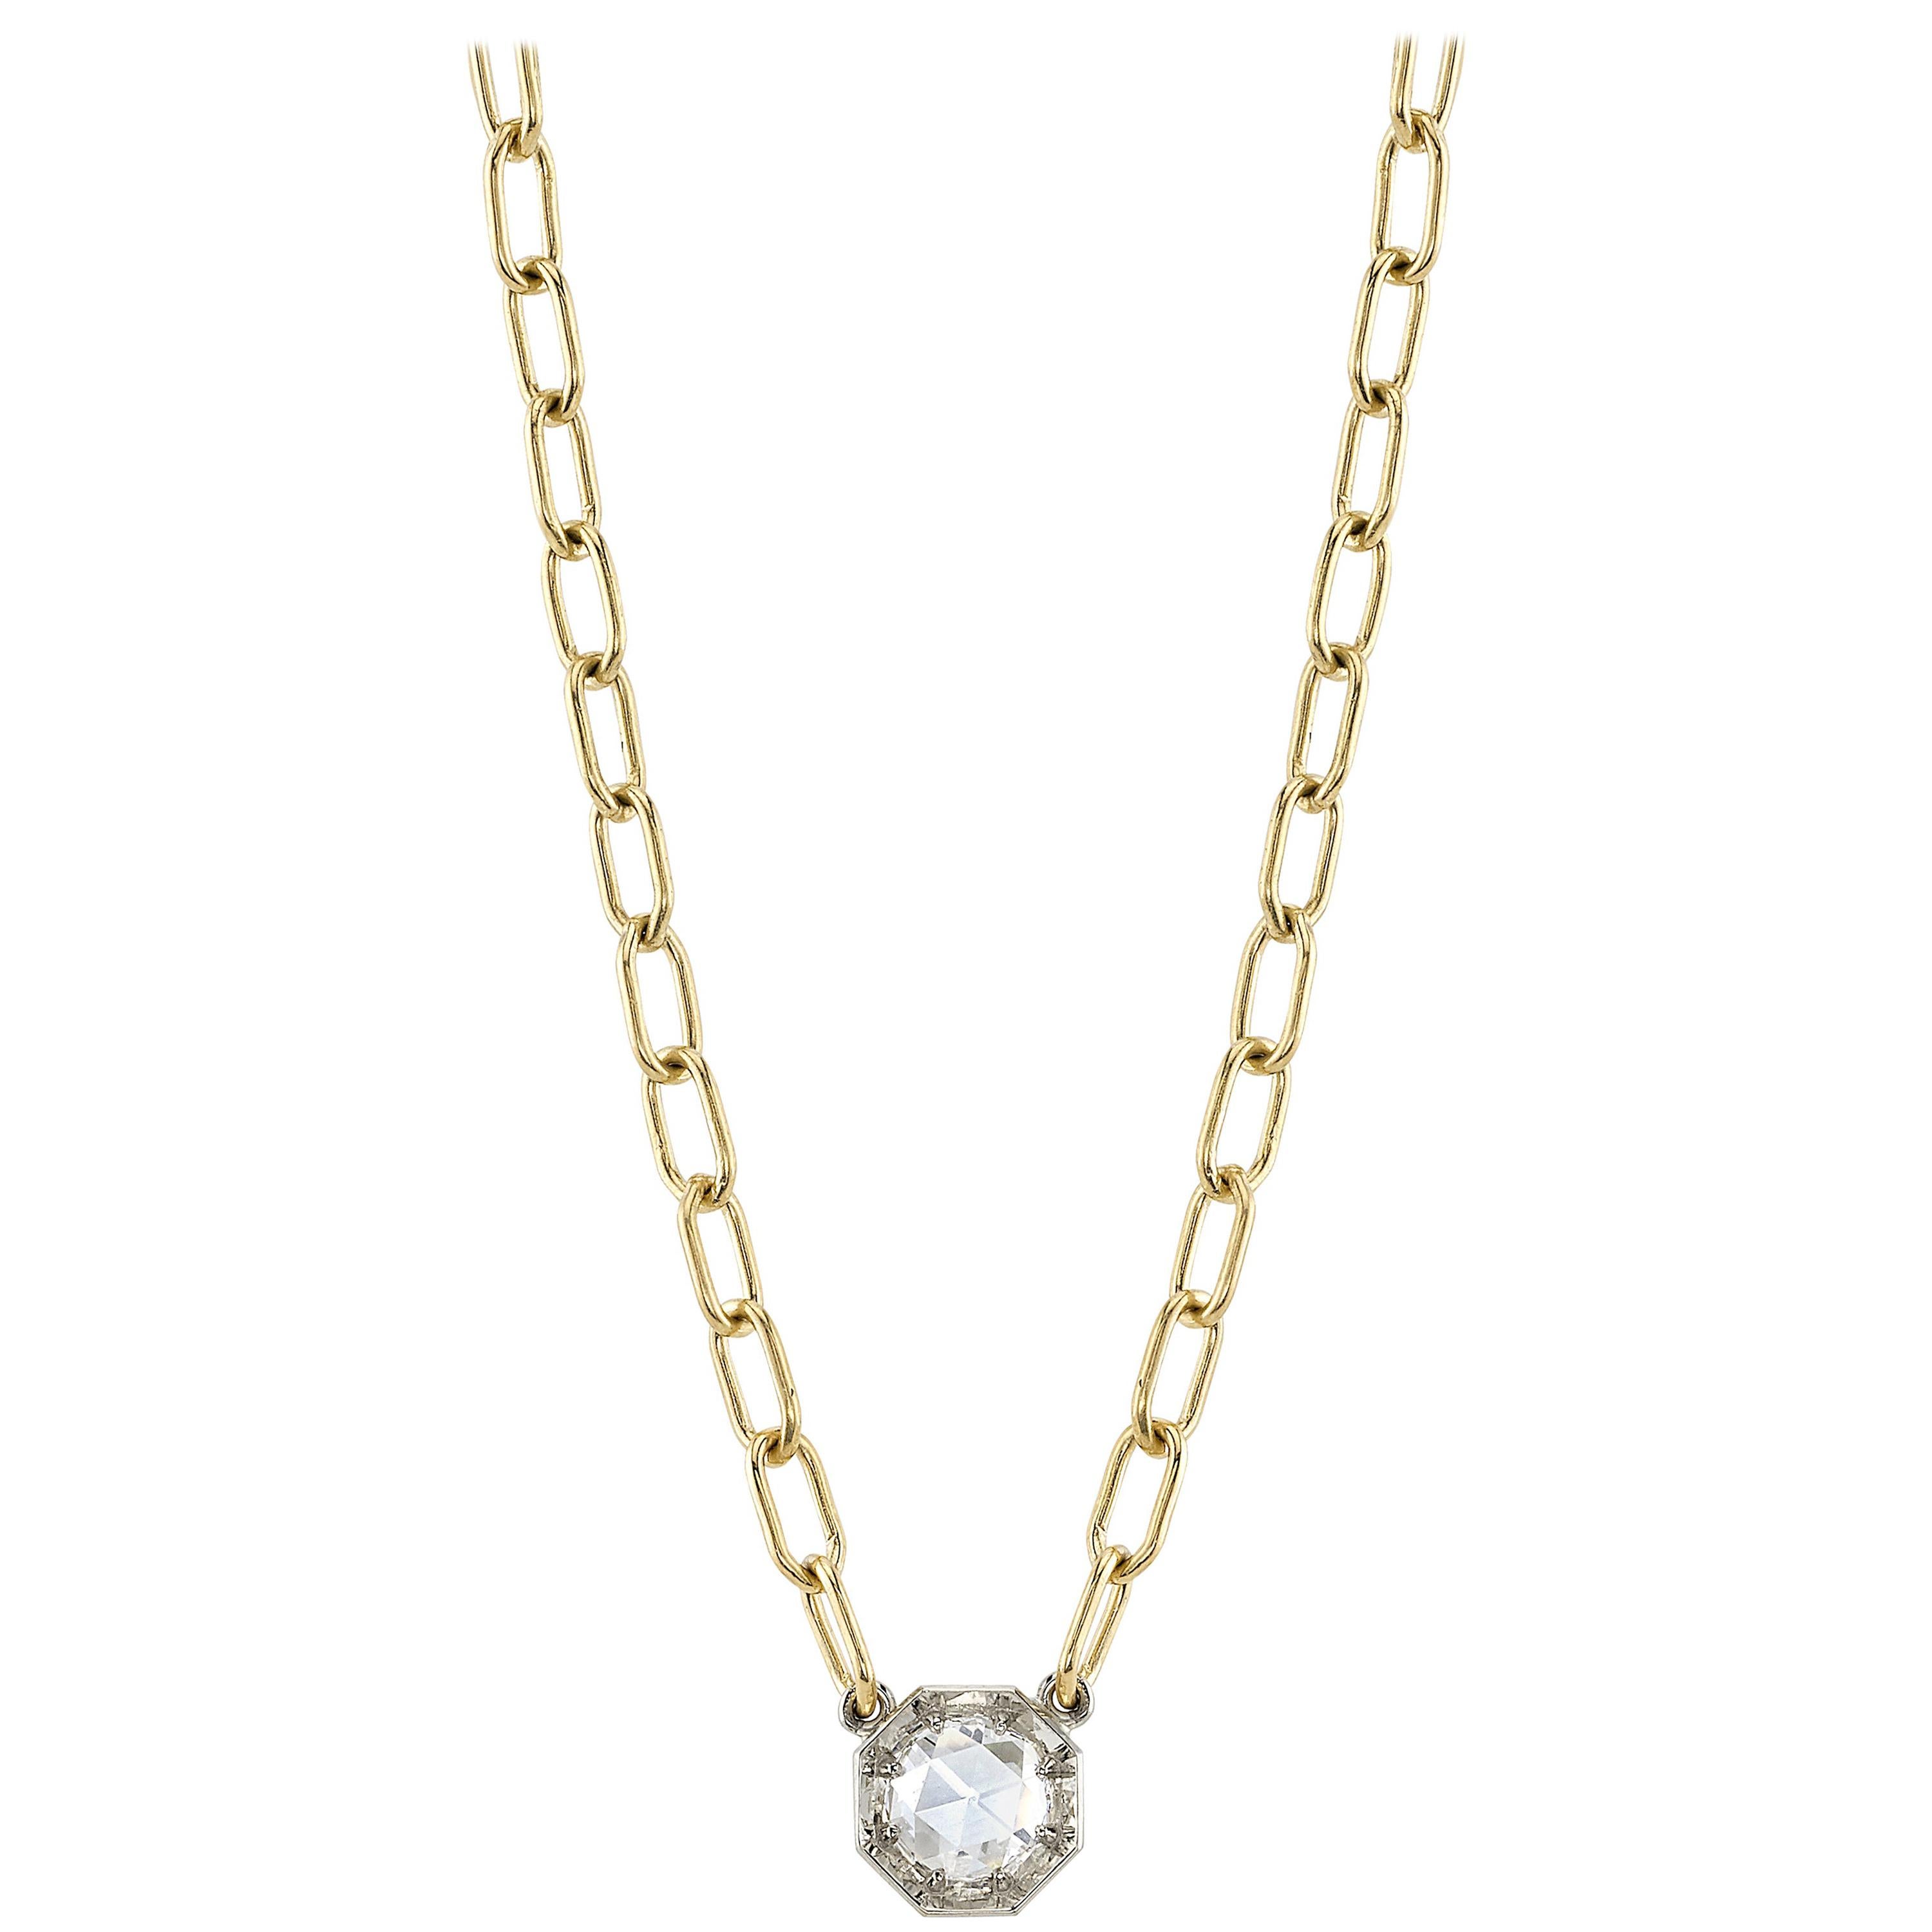 0.60 Carat GIA Certified Rose Cut Diamond on a Handcrafted 18 Karat Gold Chain